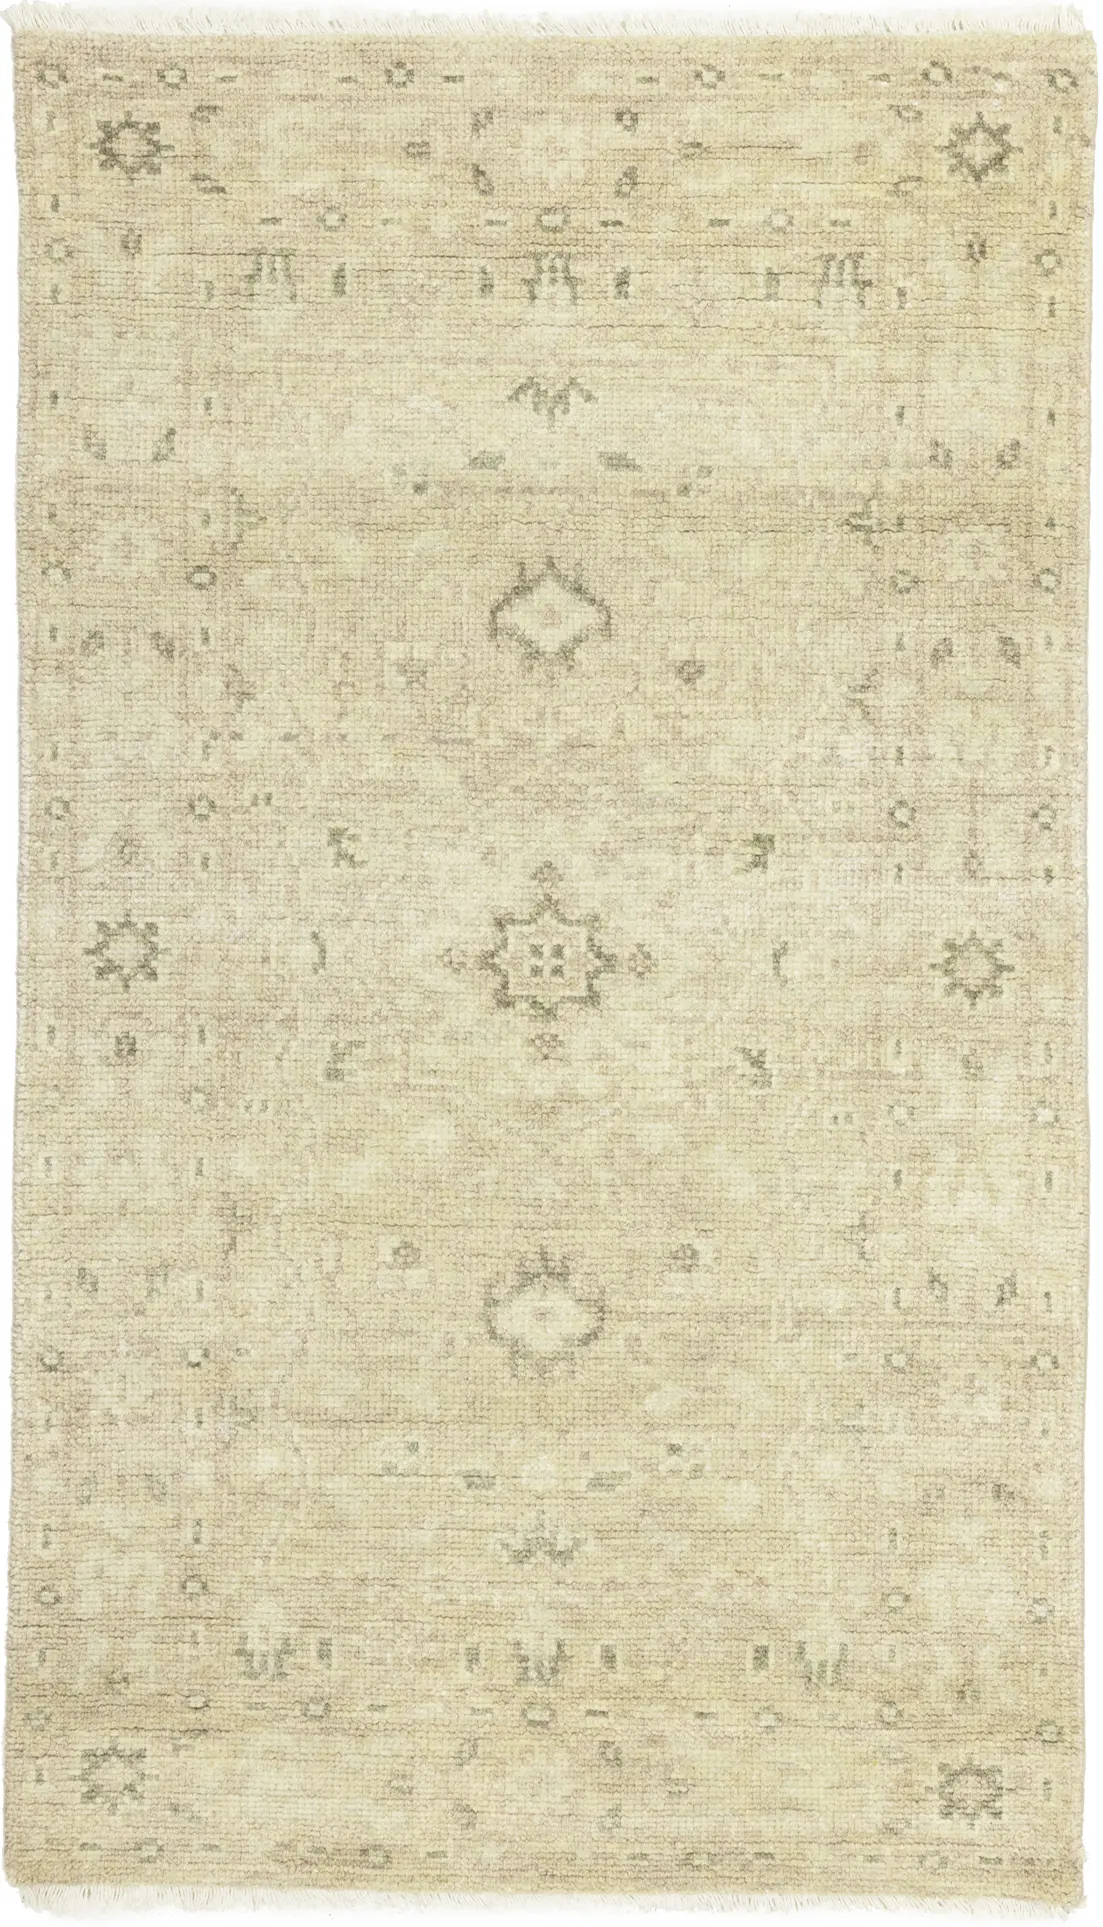 Muted Pinkish Beige Floral 3X5 Transitional Oriental Rug